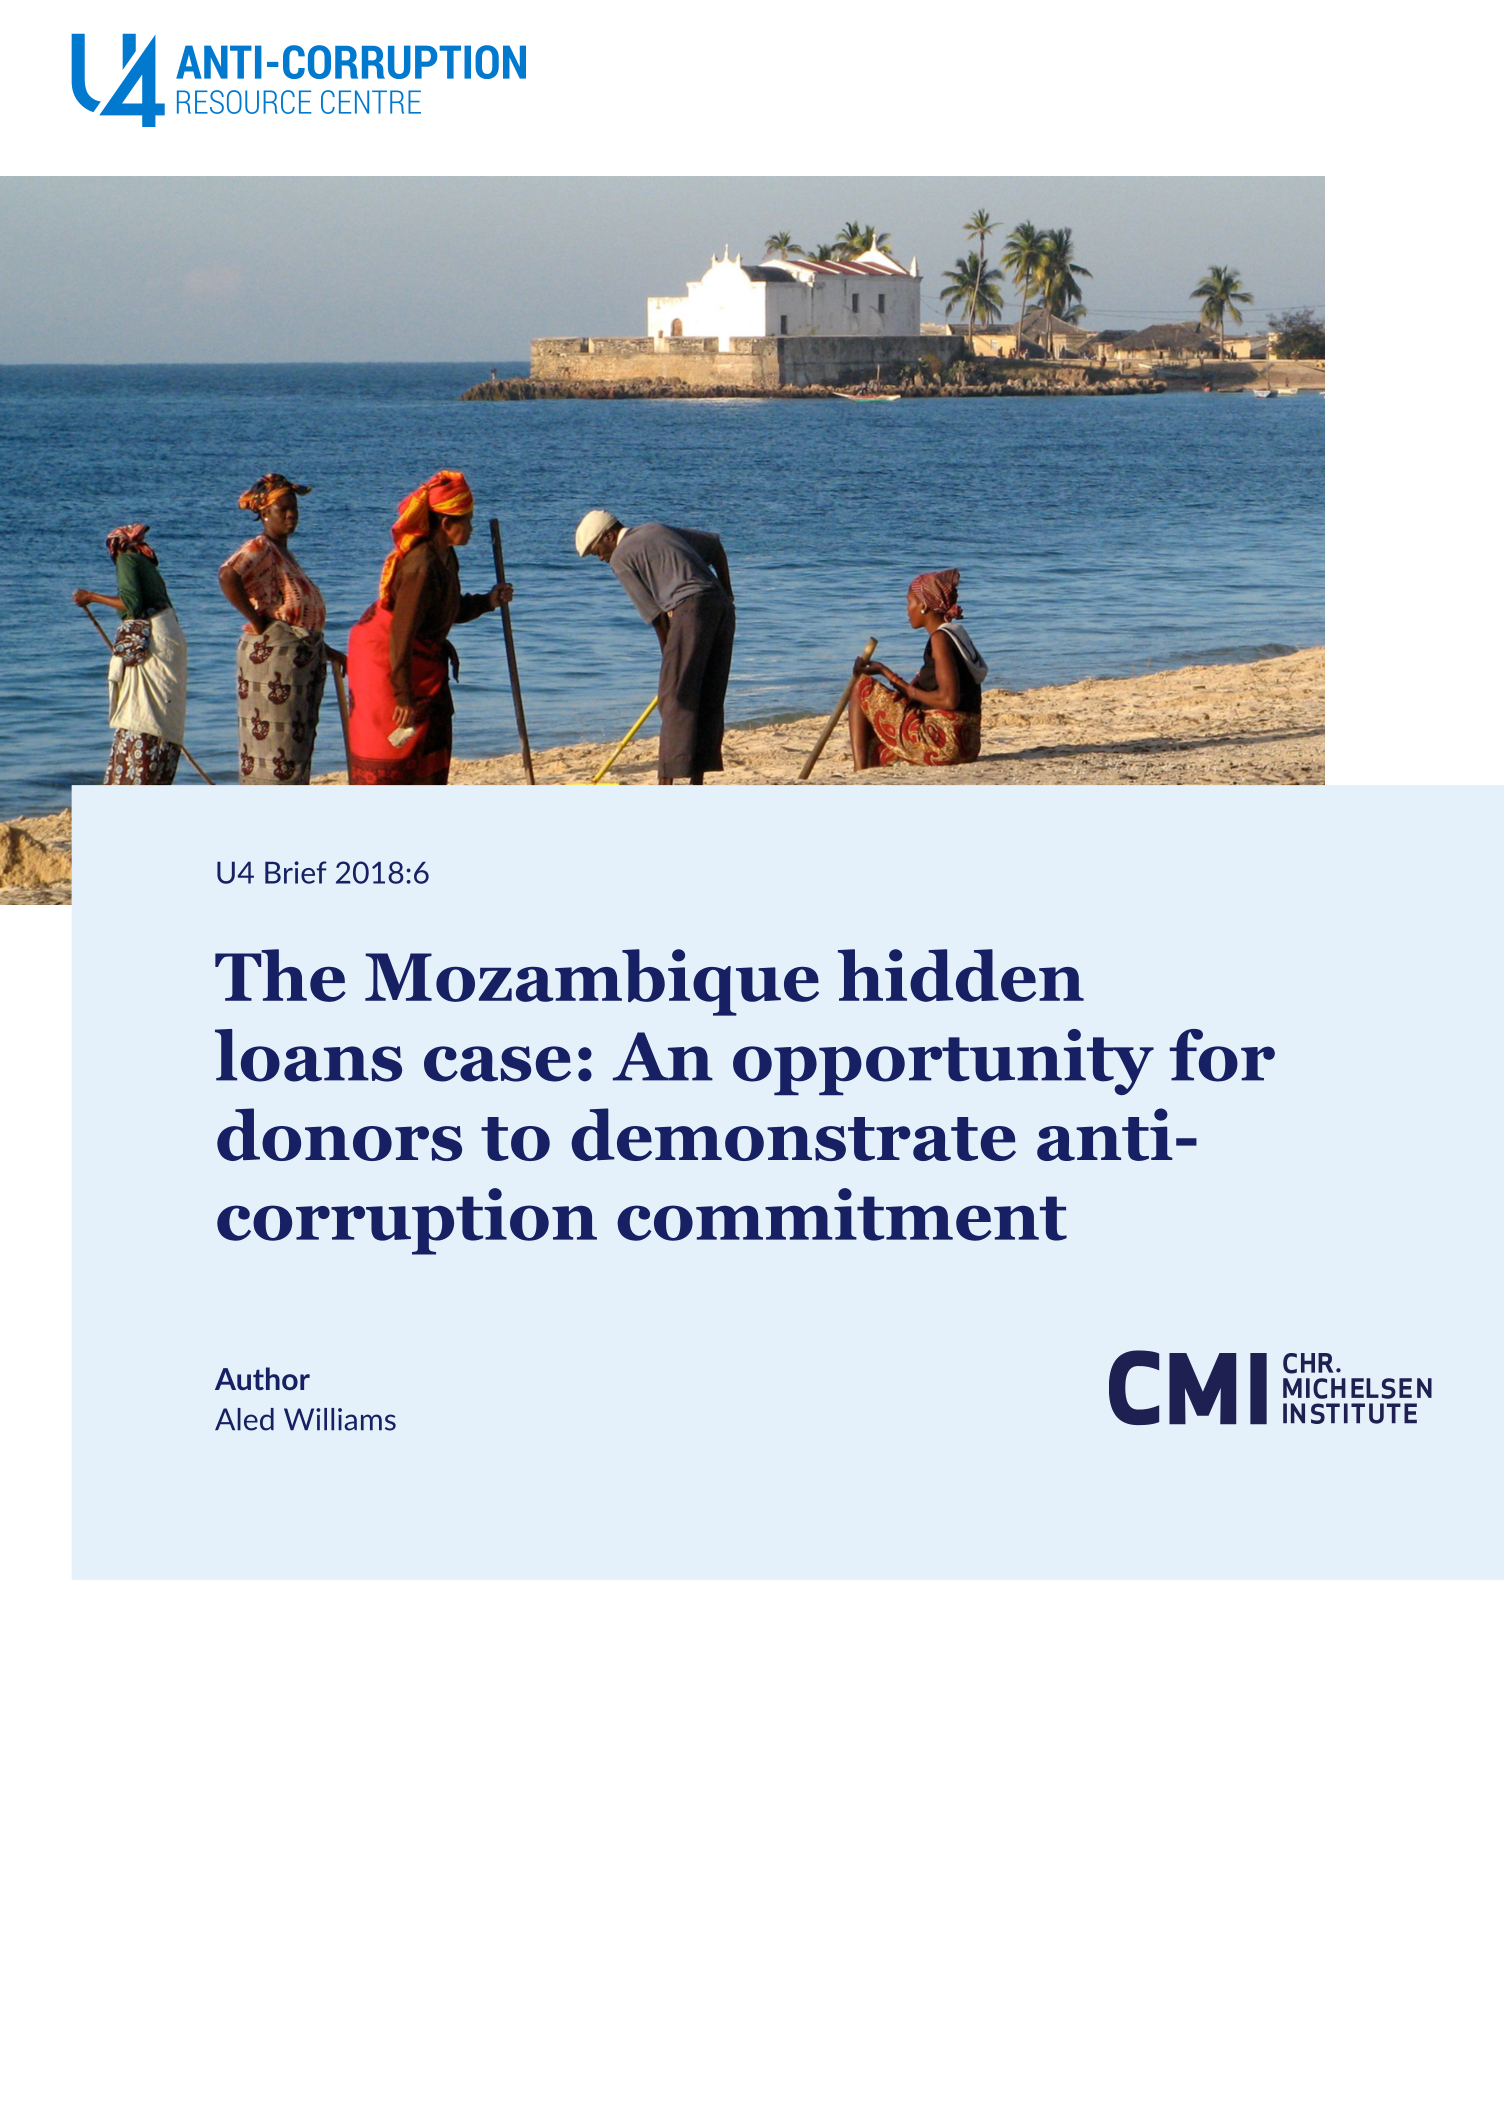 The Mozambique hidden loans case: An opportunity for donors to demonstrate anti-corruption commitment